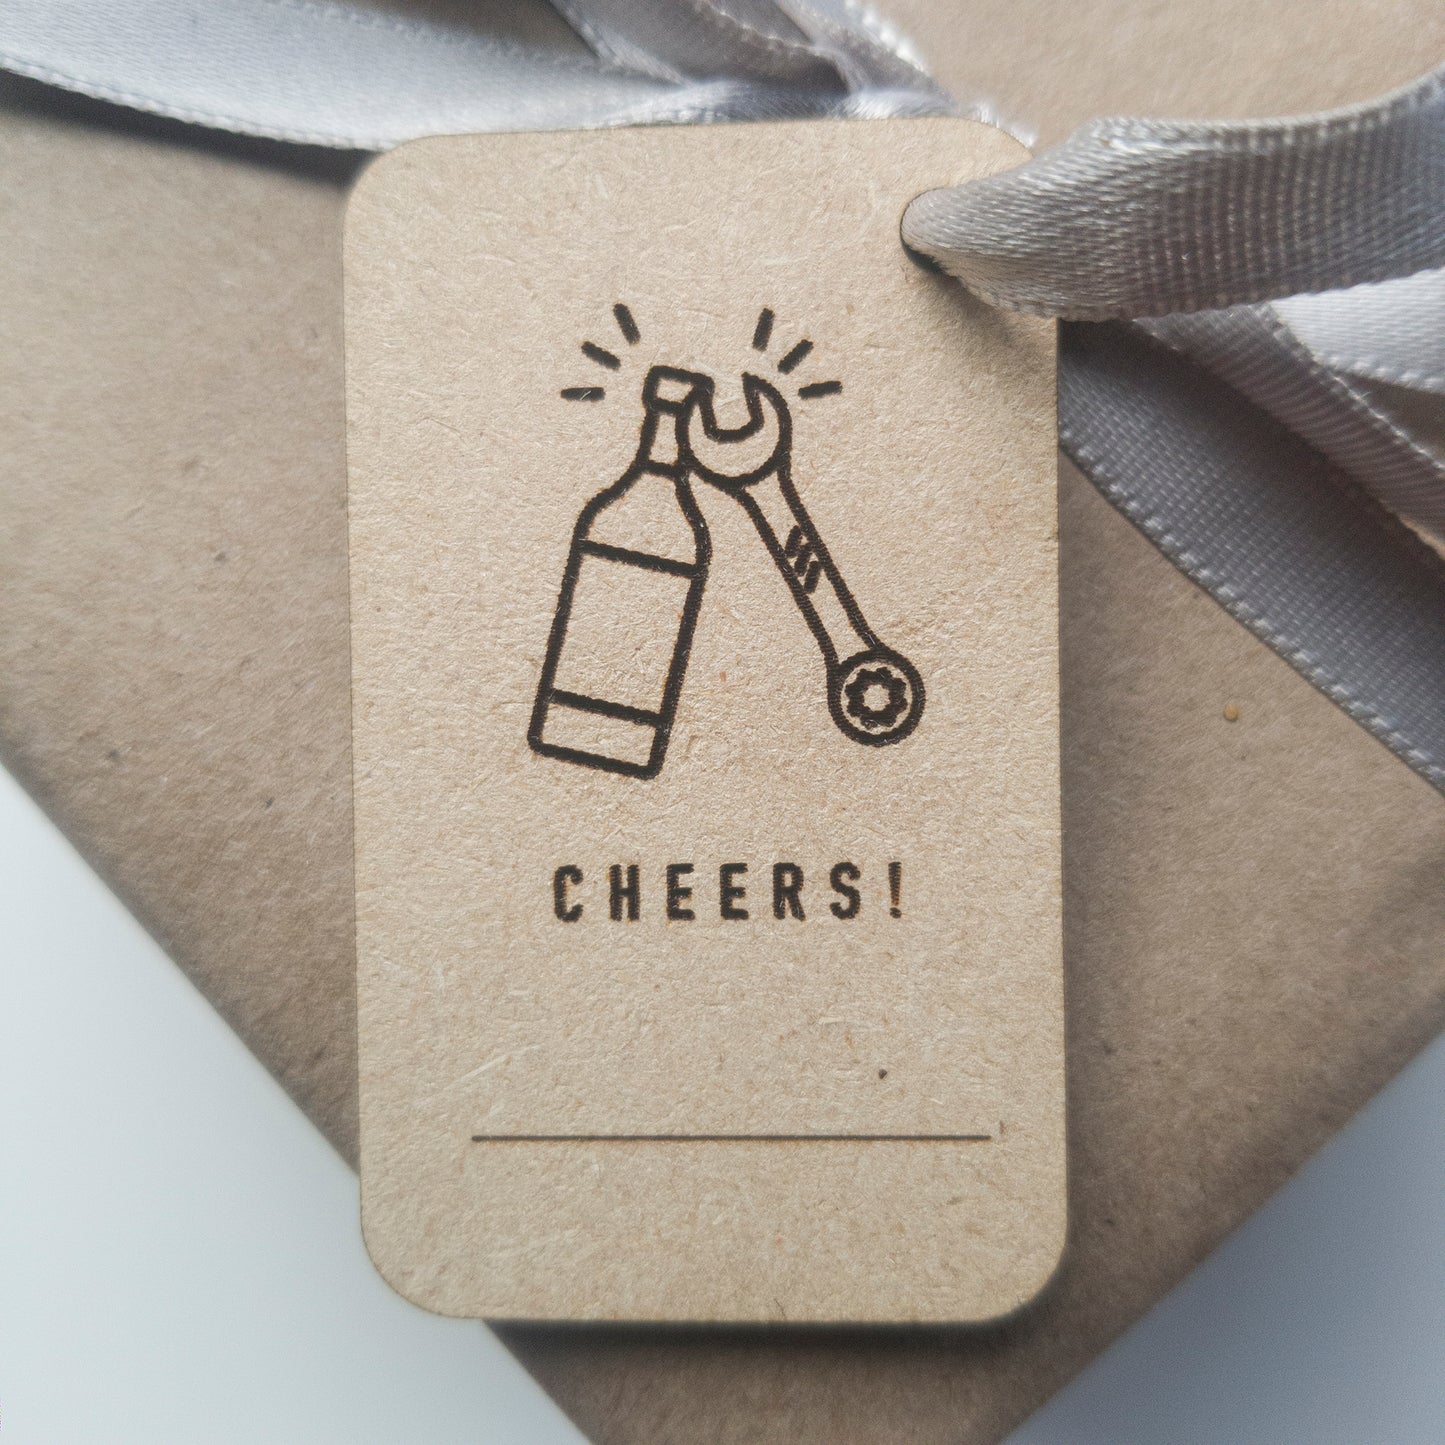 Bottle and Wrench "Cheers" Gift Tag